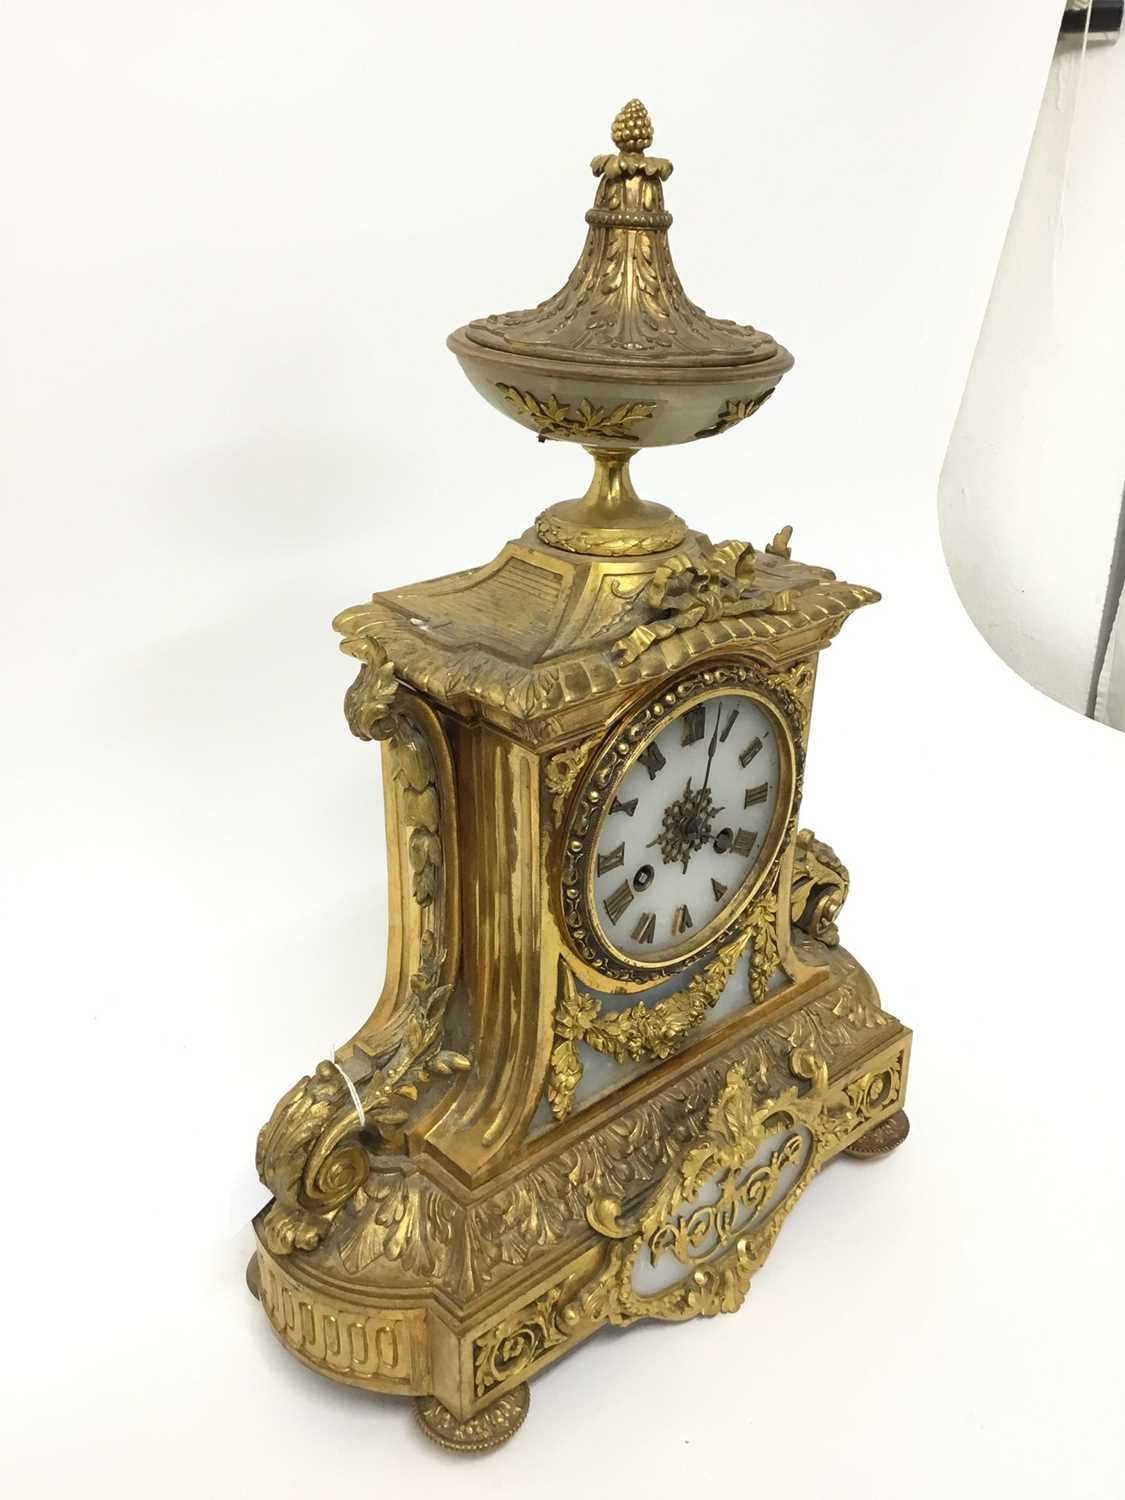 Good quality 19th century French Ormolu and White alabaster mantel clock - Image 5 of 10